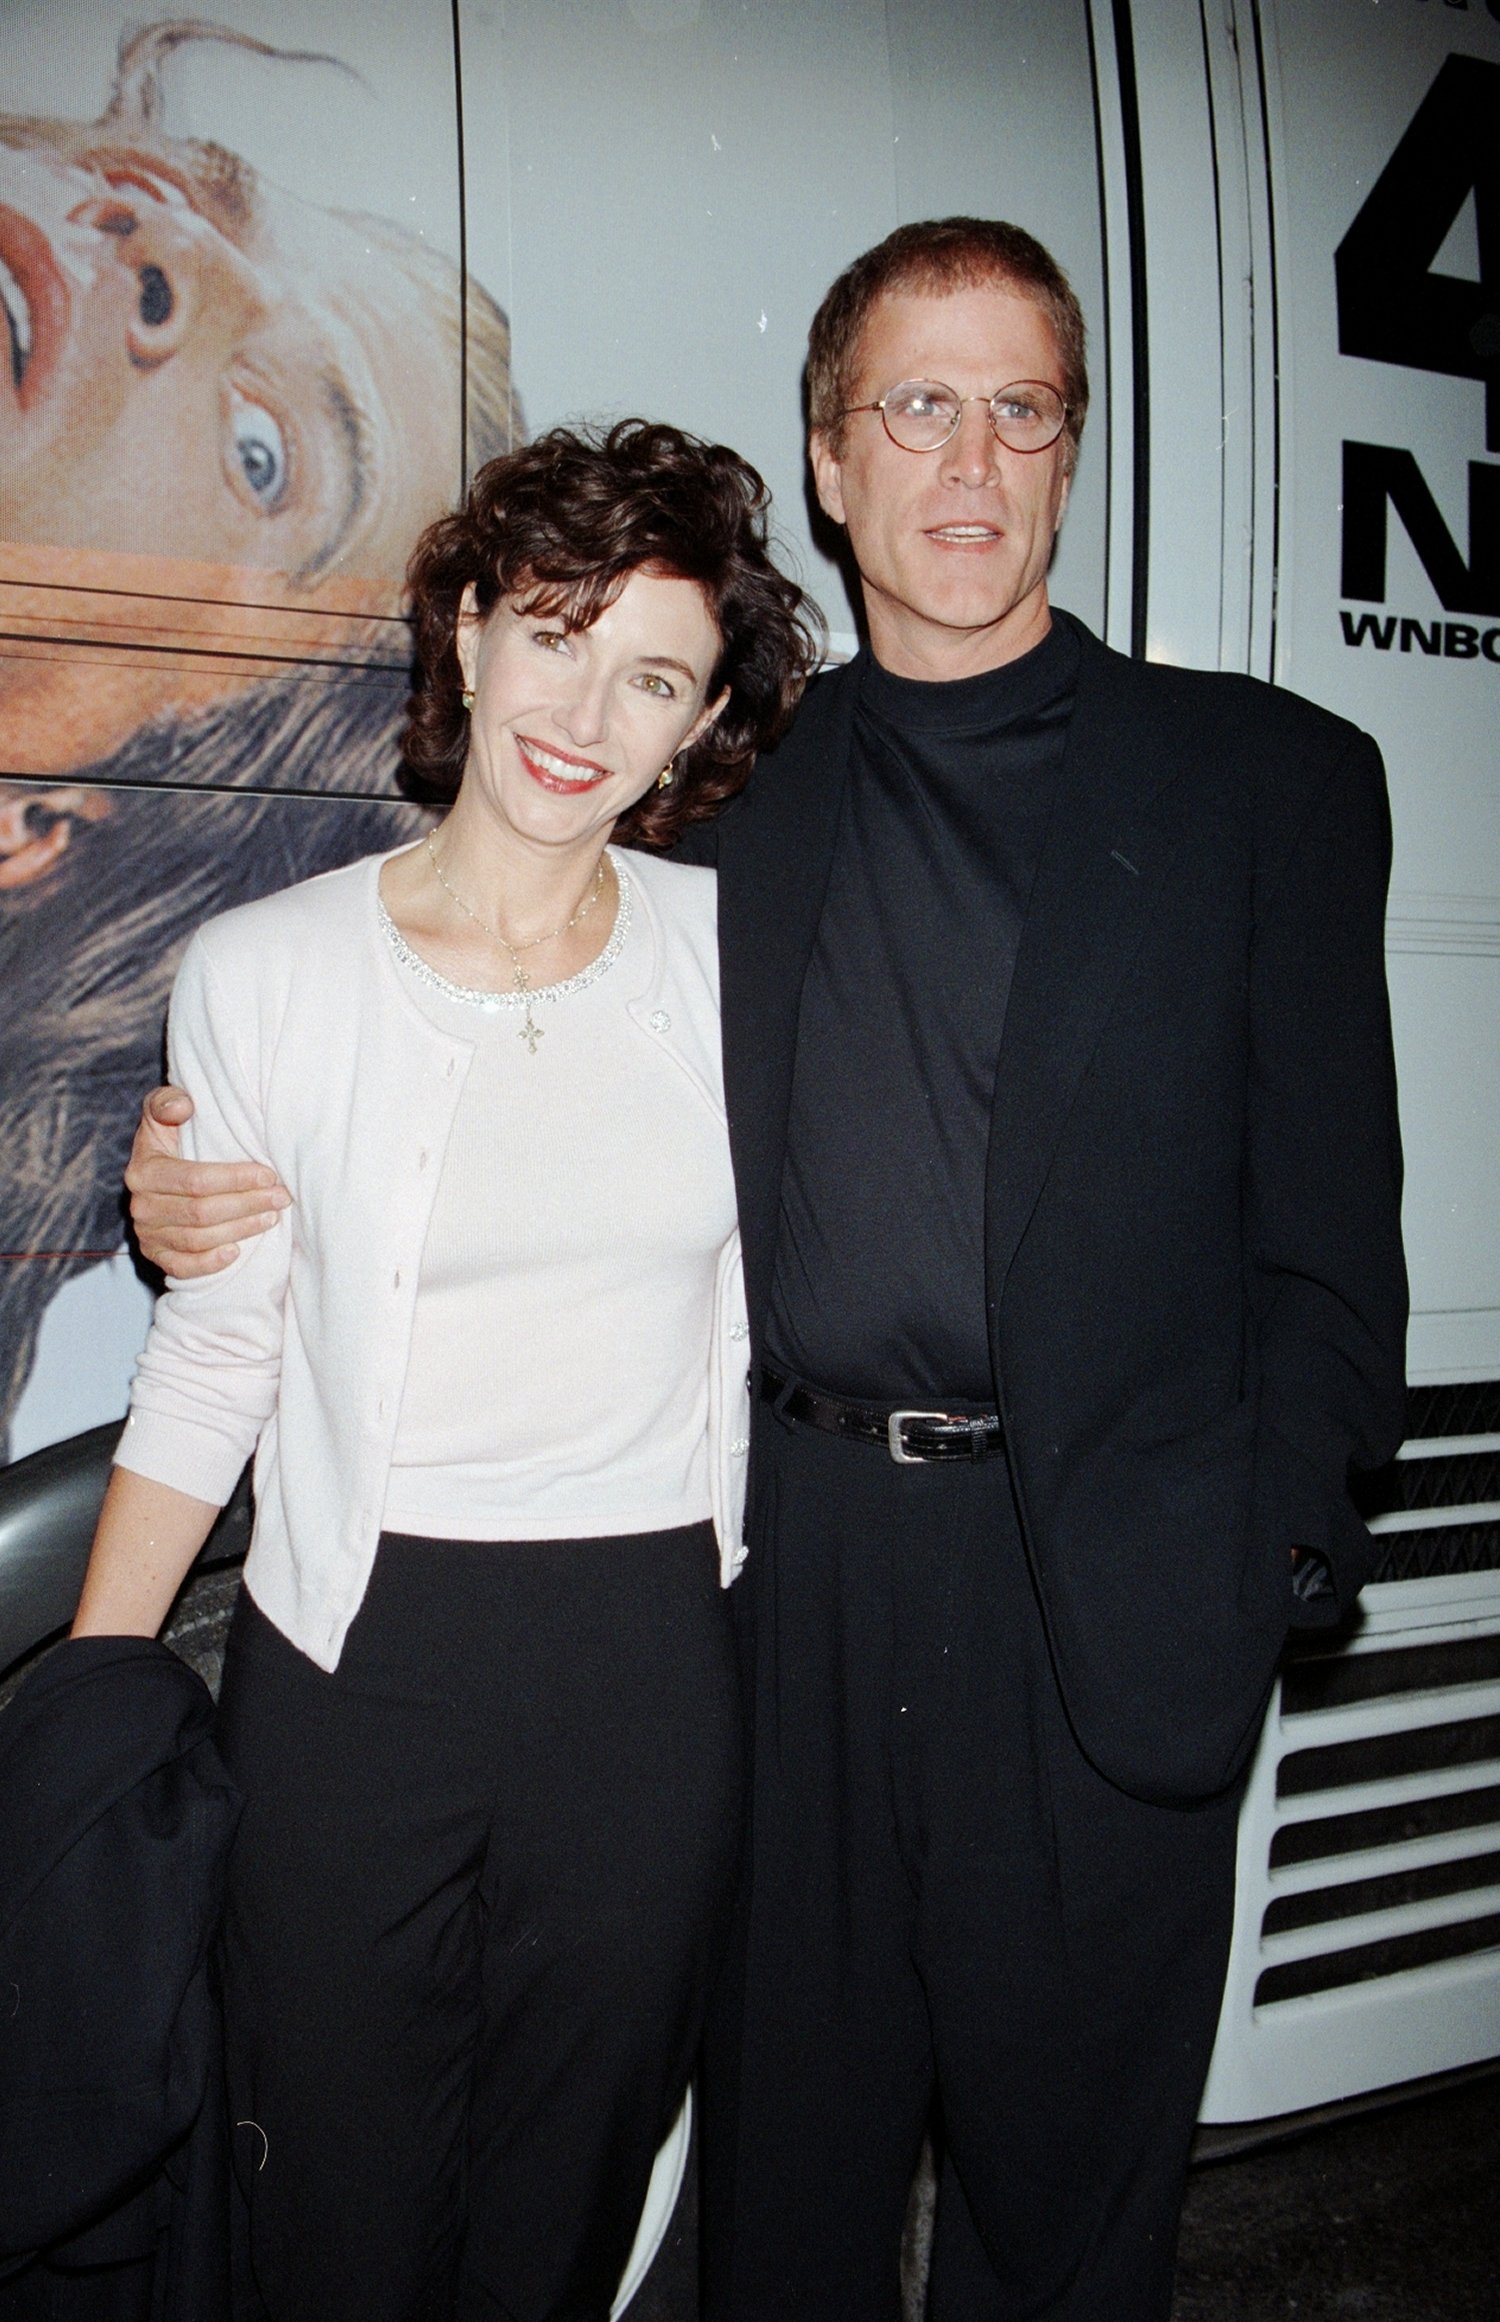 Ted Danson and his wife Mary Steenburgen during the premiere of their movie "Gulliver's Travels" at the Walter Reade Theatre. / Source: Getty Images